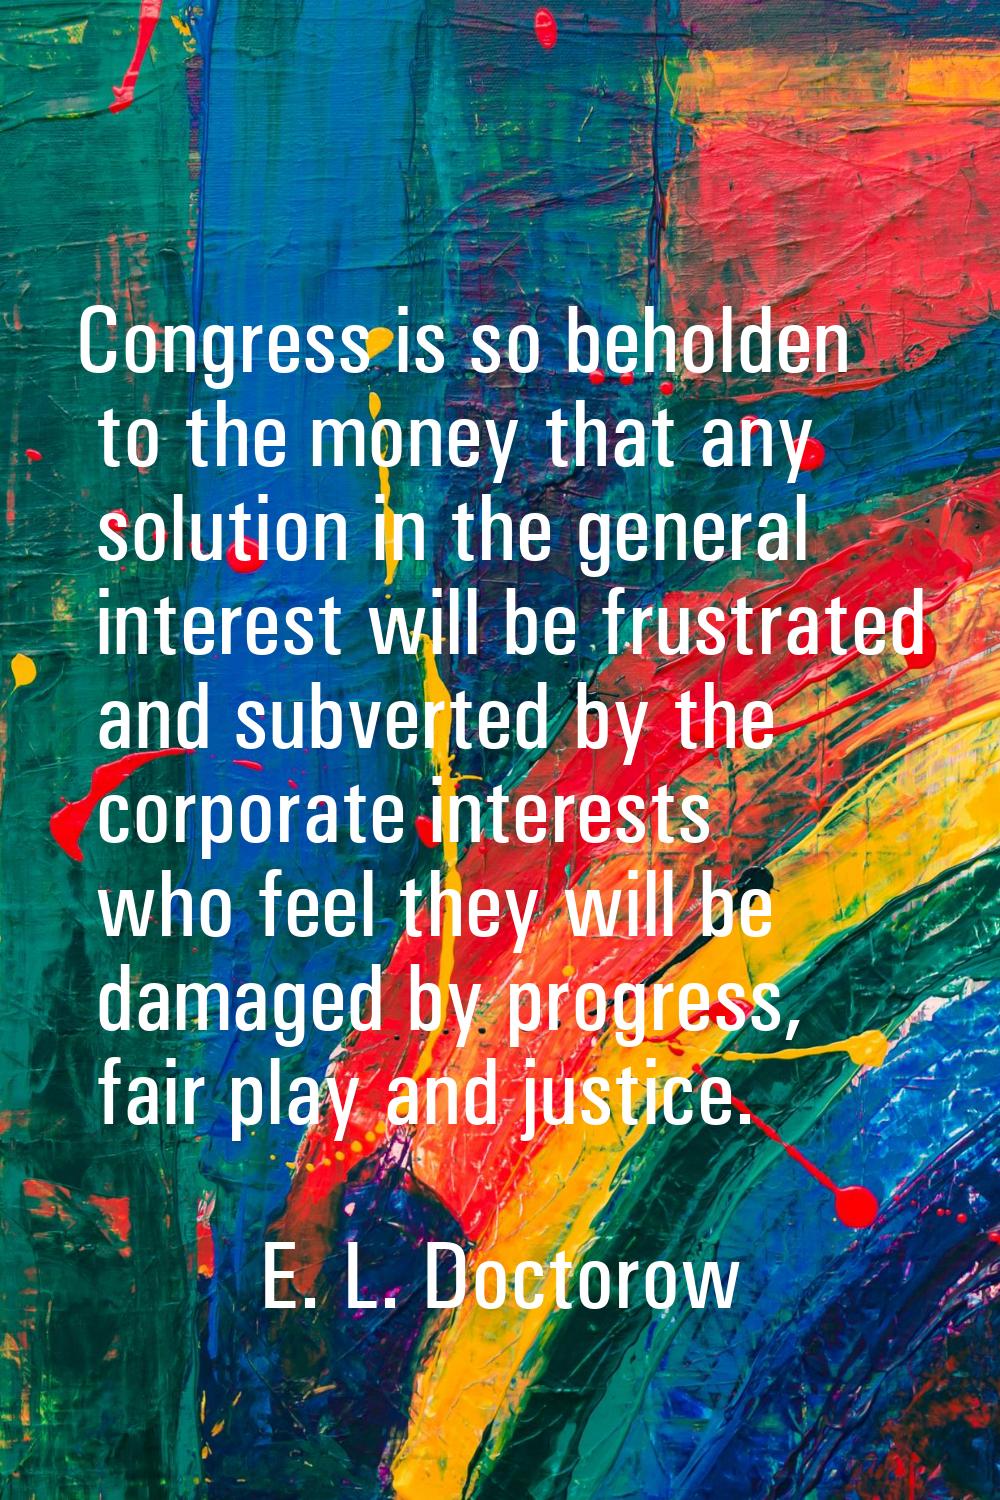 Congress is so beholden to the money that any solution in the general interest will be frustrated a